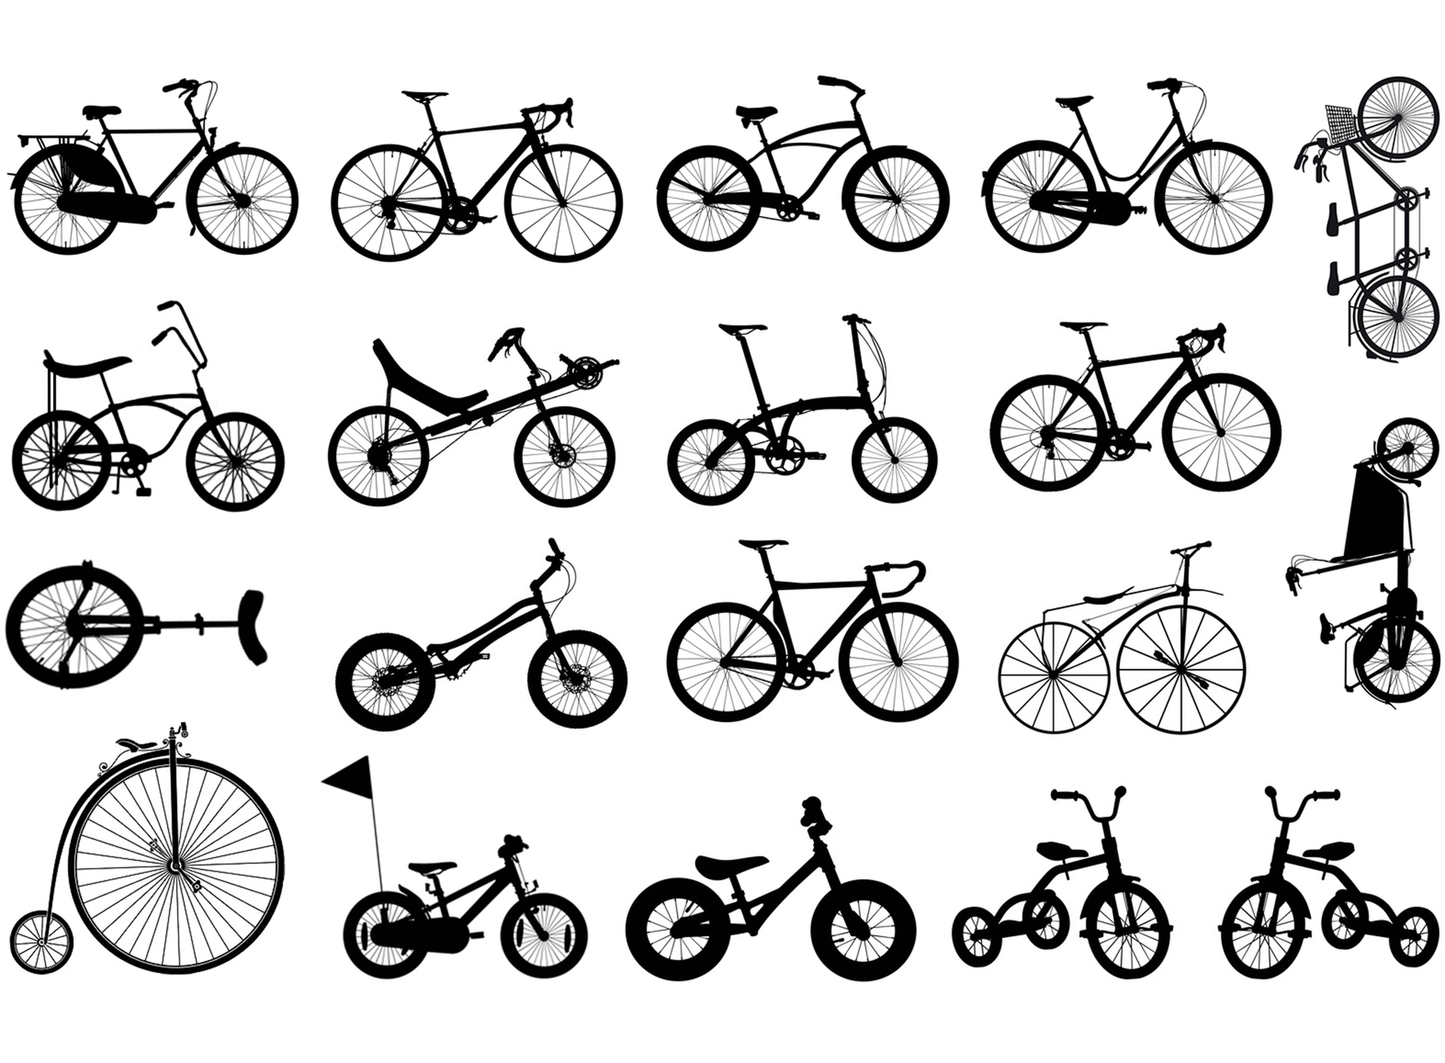 Bicycle 19 Pcs 1" Black Fused Glass Decals